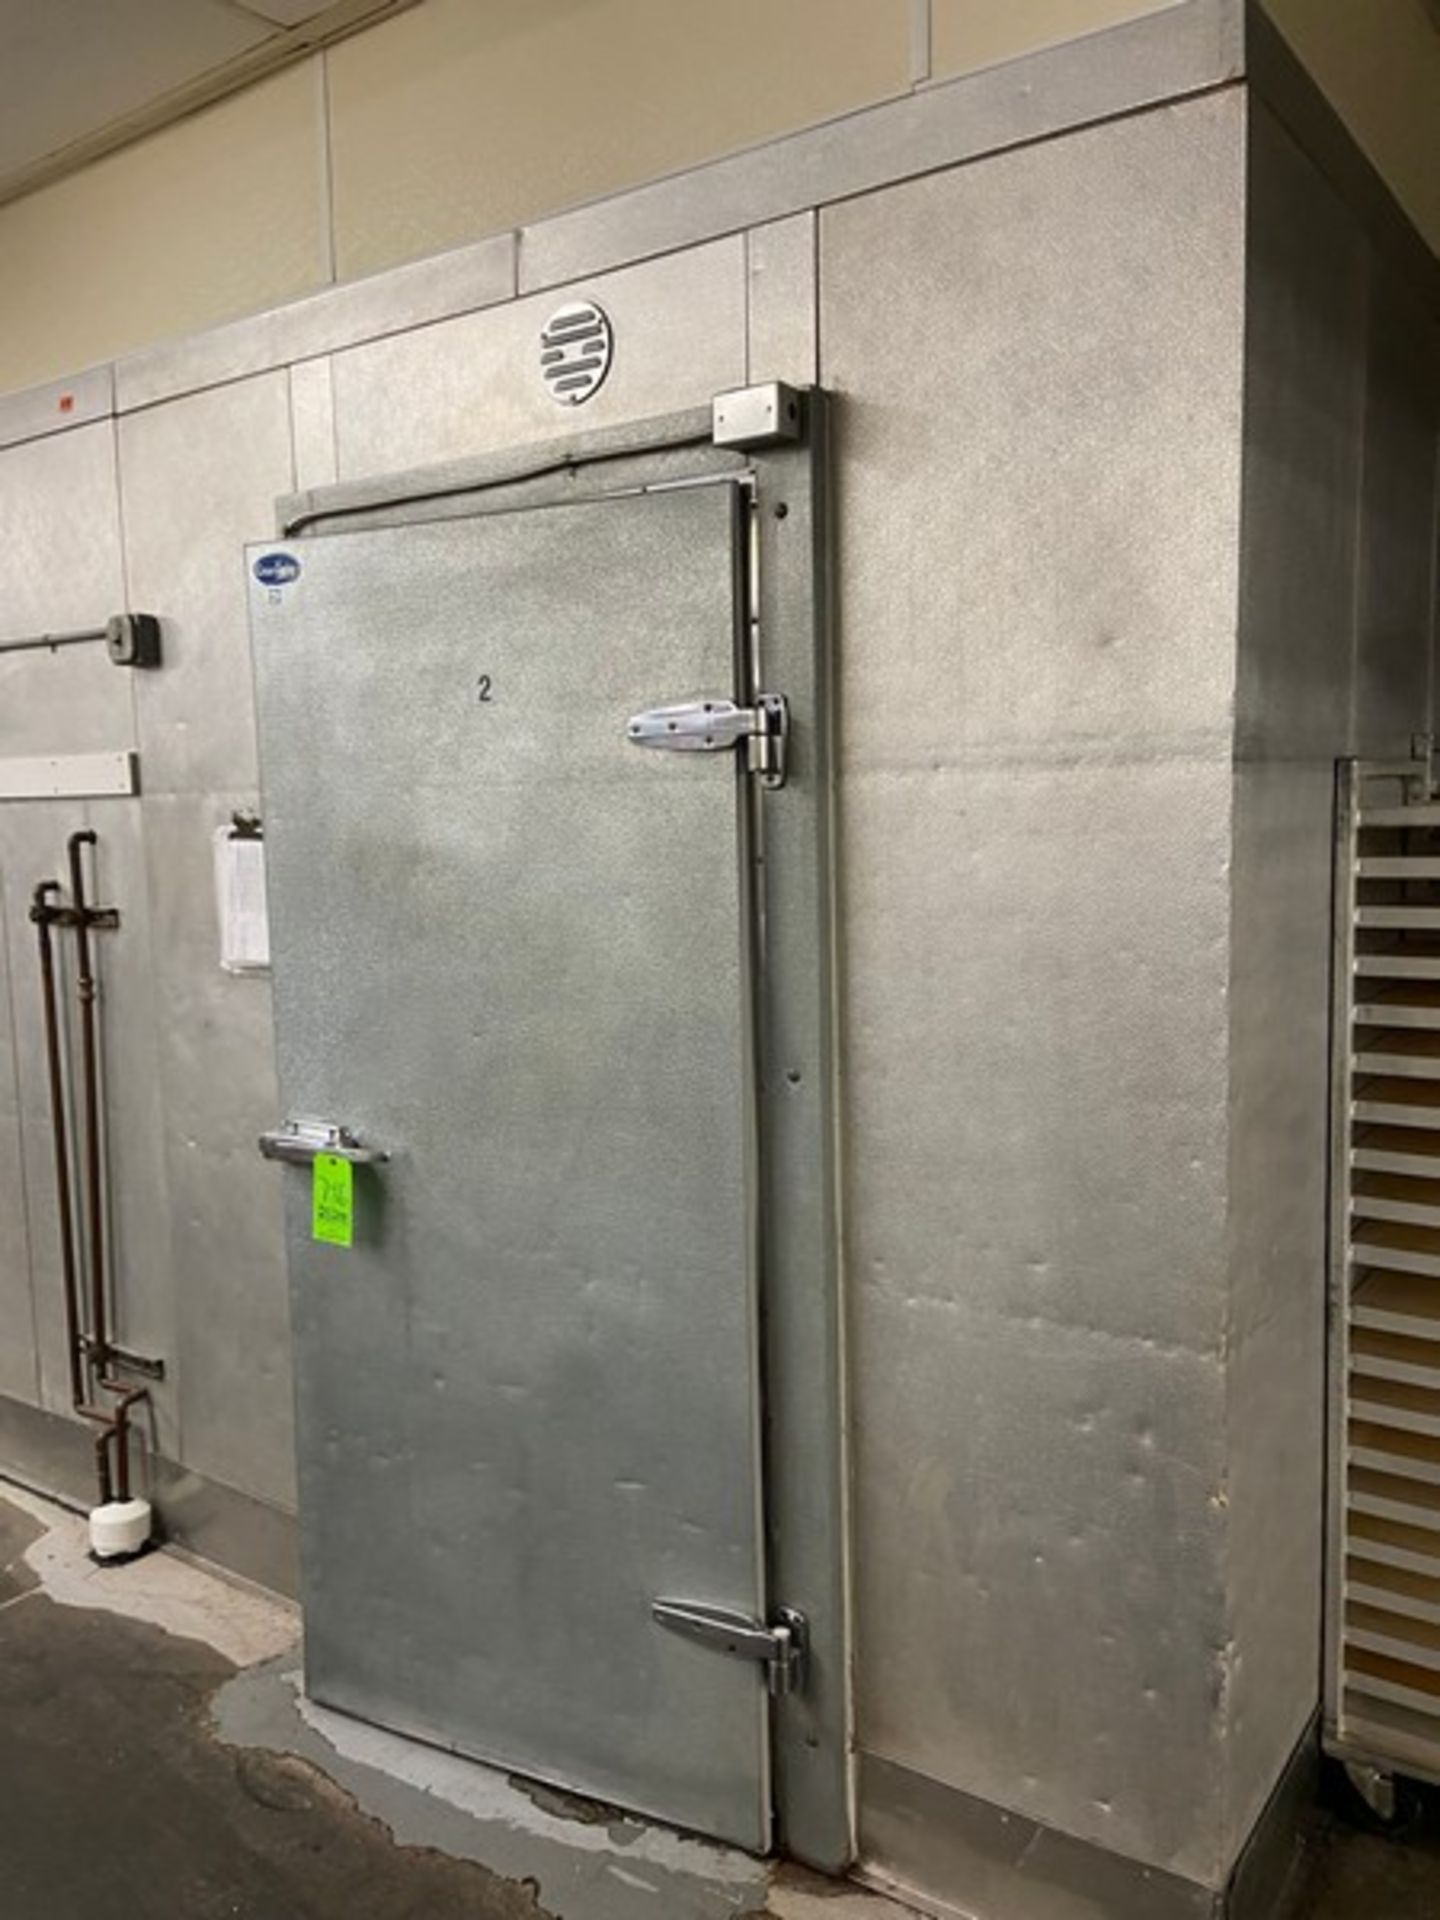 WALK-IN BLAST FREEZER, WITH (2) KRAMER 3-FAN BLOWER UNITS INSIDE THE UNITS, WITH (2) DOORS (LOCATED - Image 2 of 7